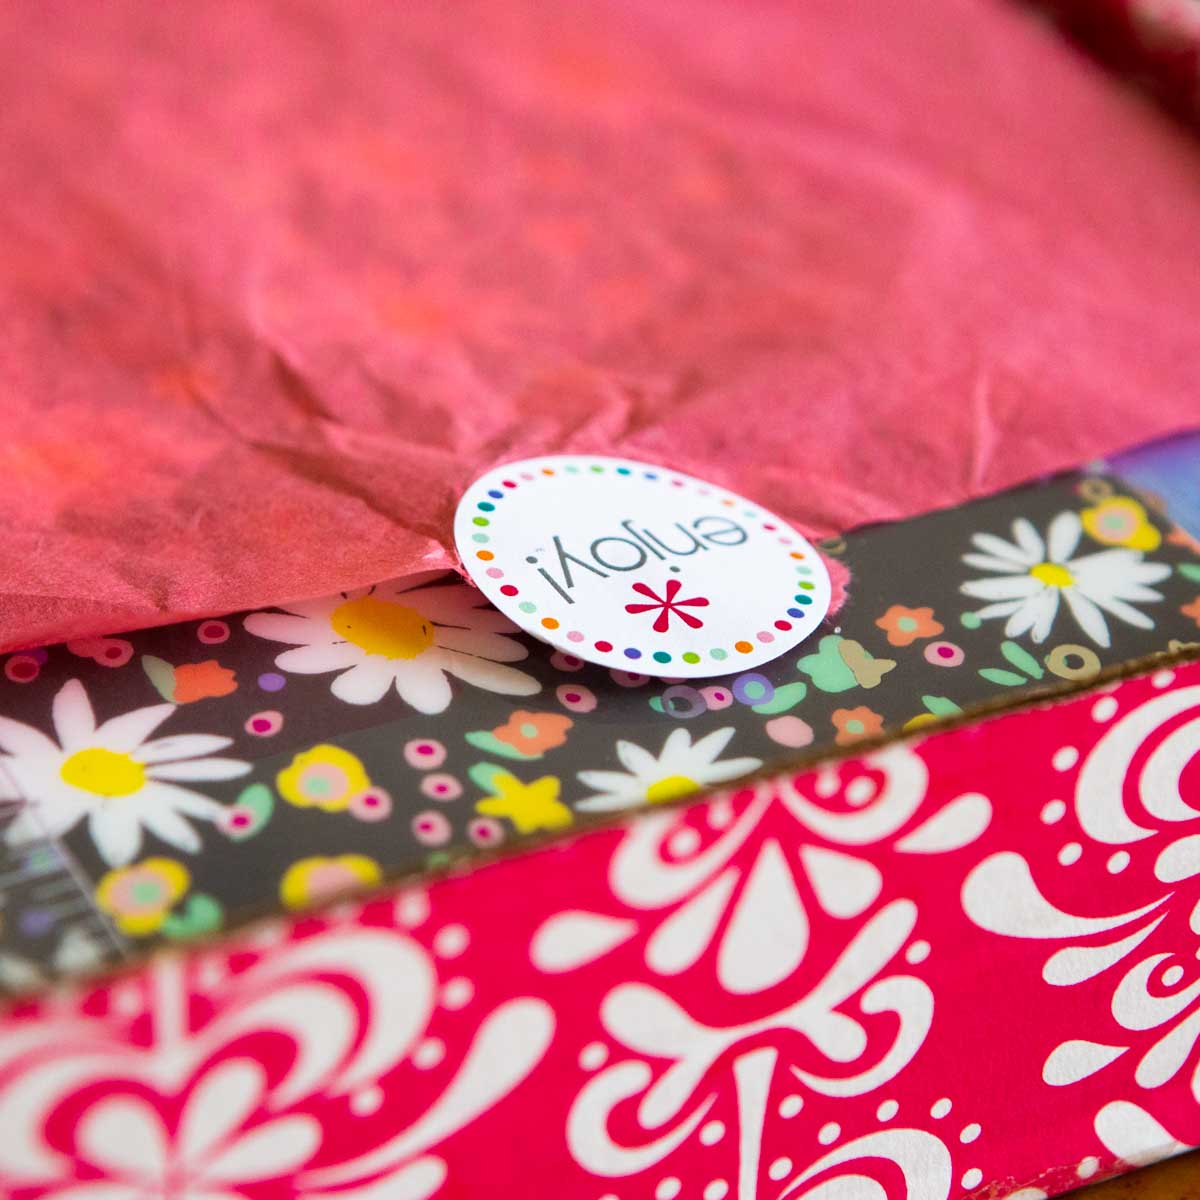 An Erin Condren life planner sits in the red and white gift box it arrived in wrapped in tissue paper.